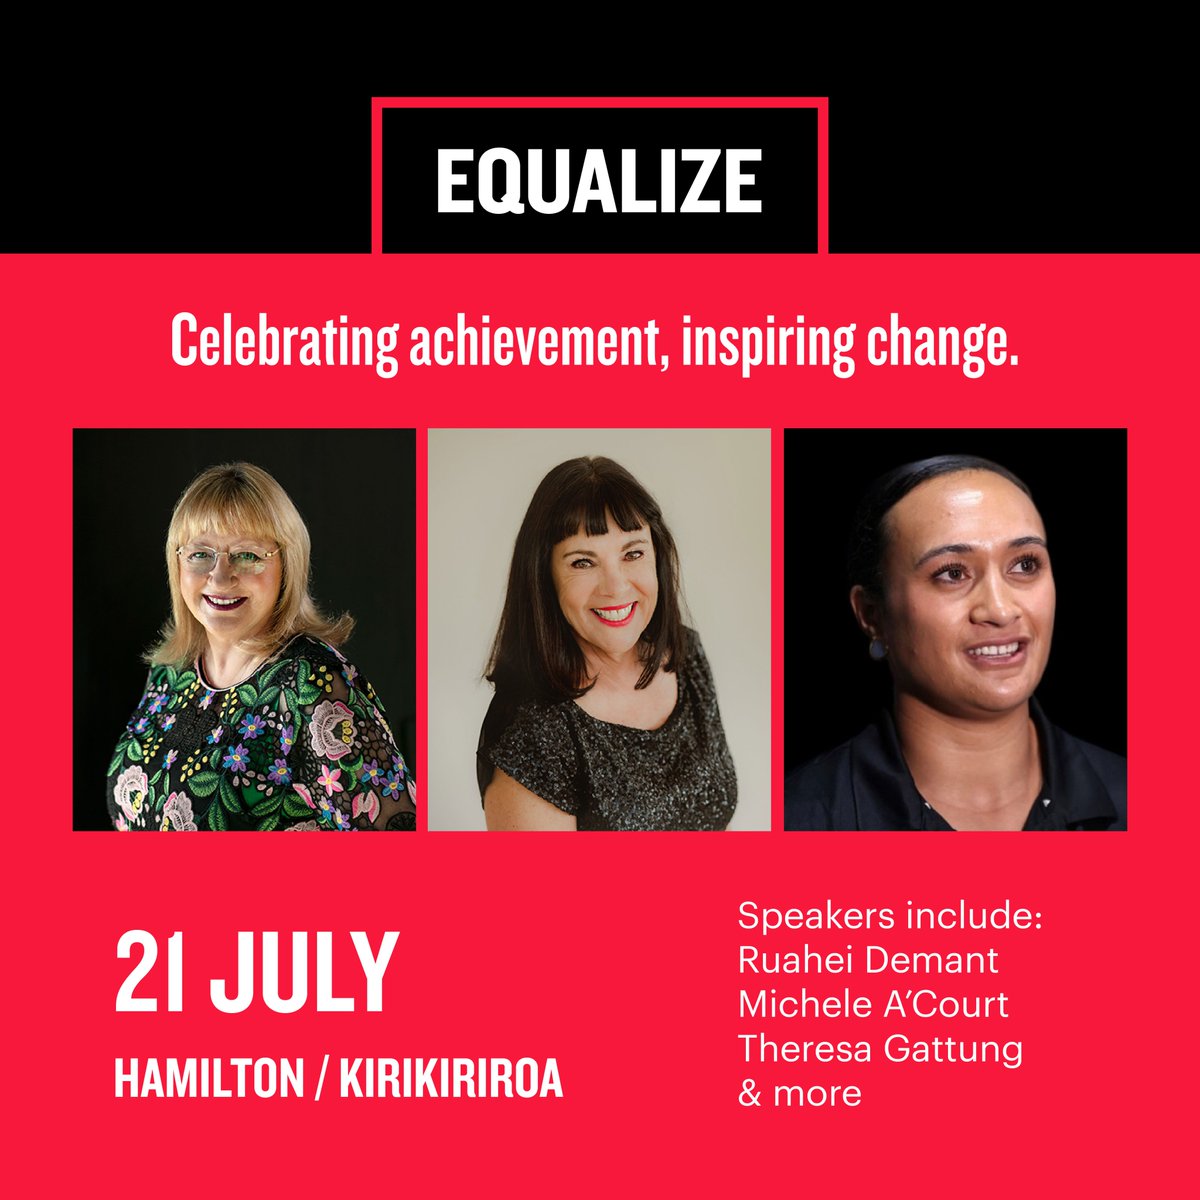 📢 We're on the brink of launching our EQUALIZE speaker series in Hamilton / Kirikiriroa, with only one day to go!🕙Tomorrow at 10am, the Claudelands Event Centre will be a hub of inspiration and motivation. We're excited to meet you. #EQUALIZENZ